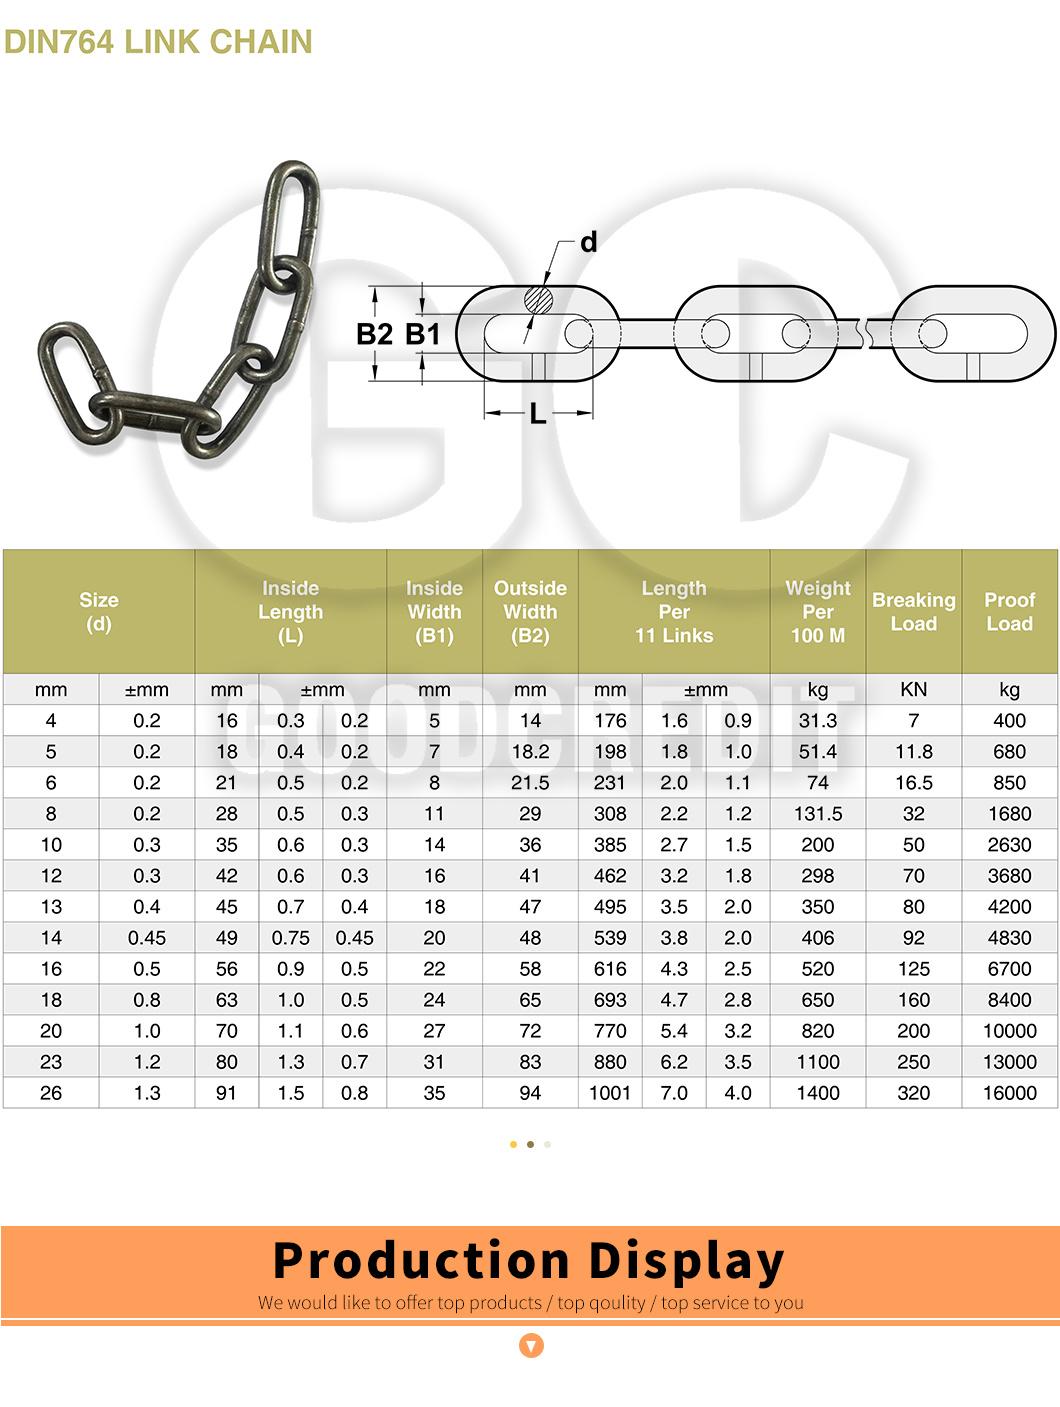 Factory Hot Sale DIN 763 Link Chain